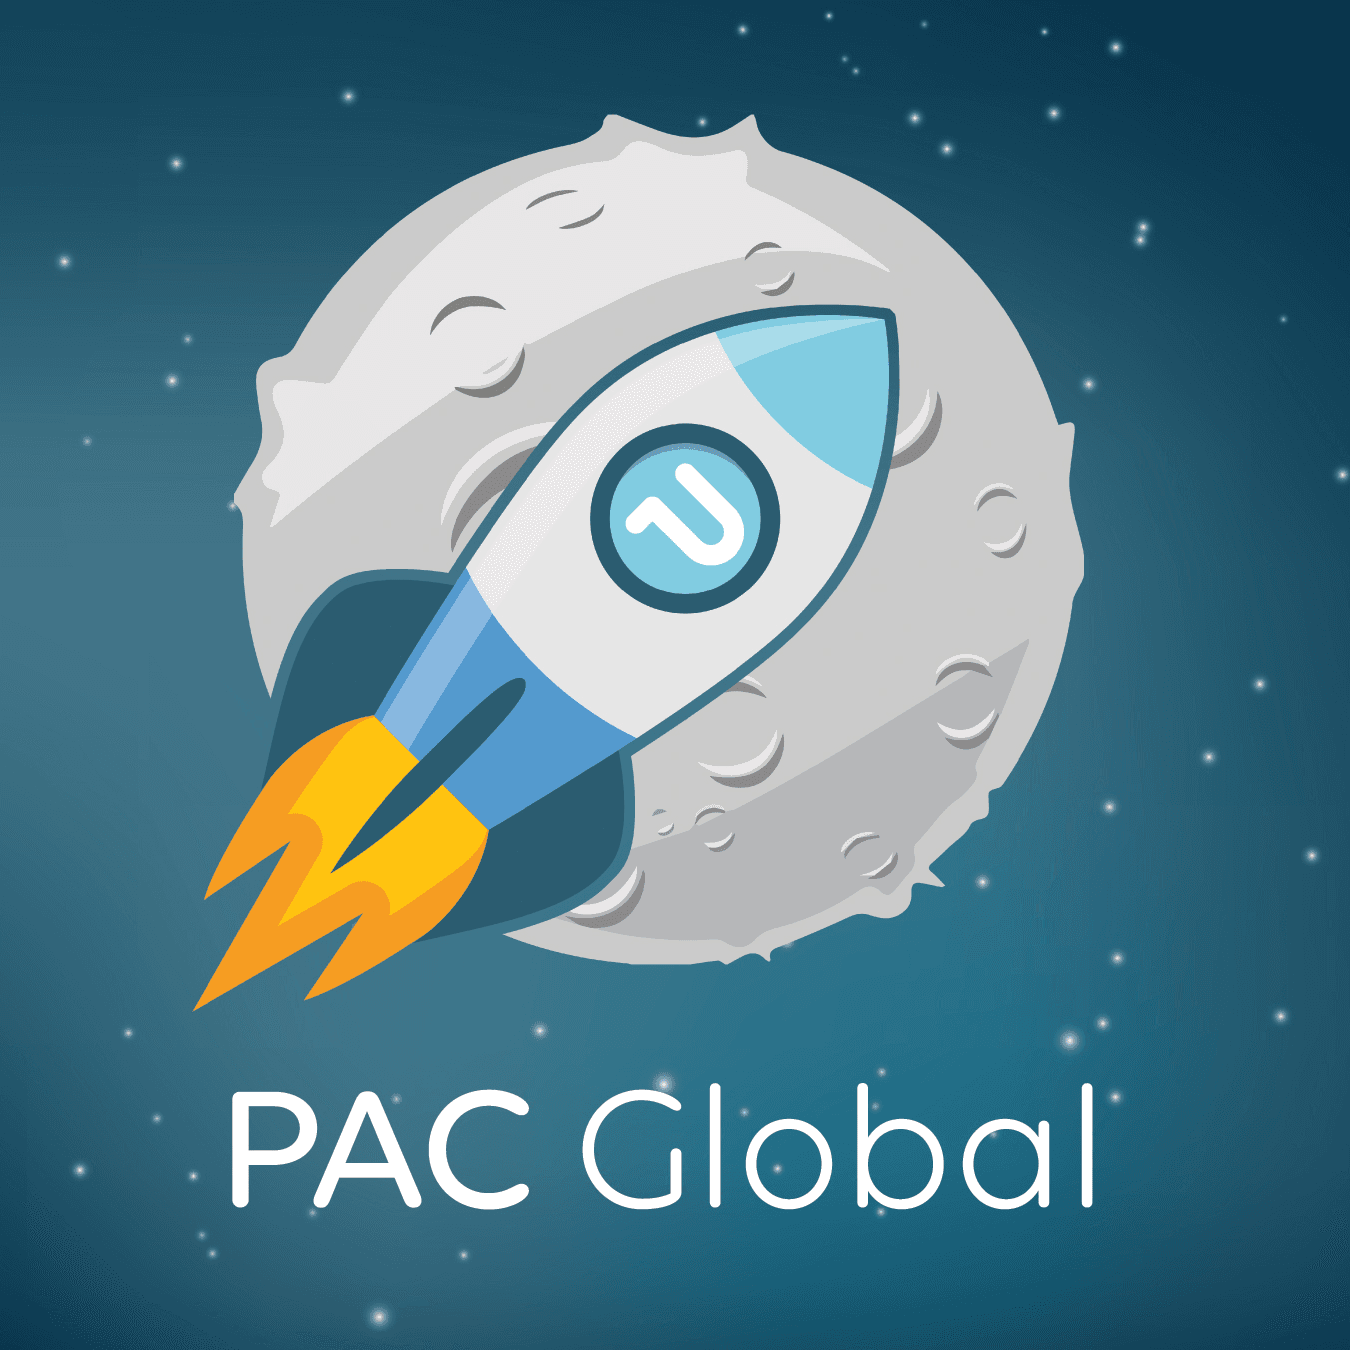 Pac Global to the moon!